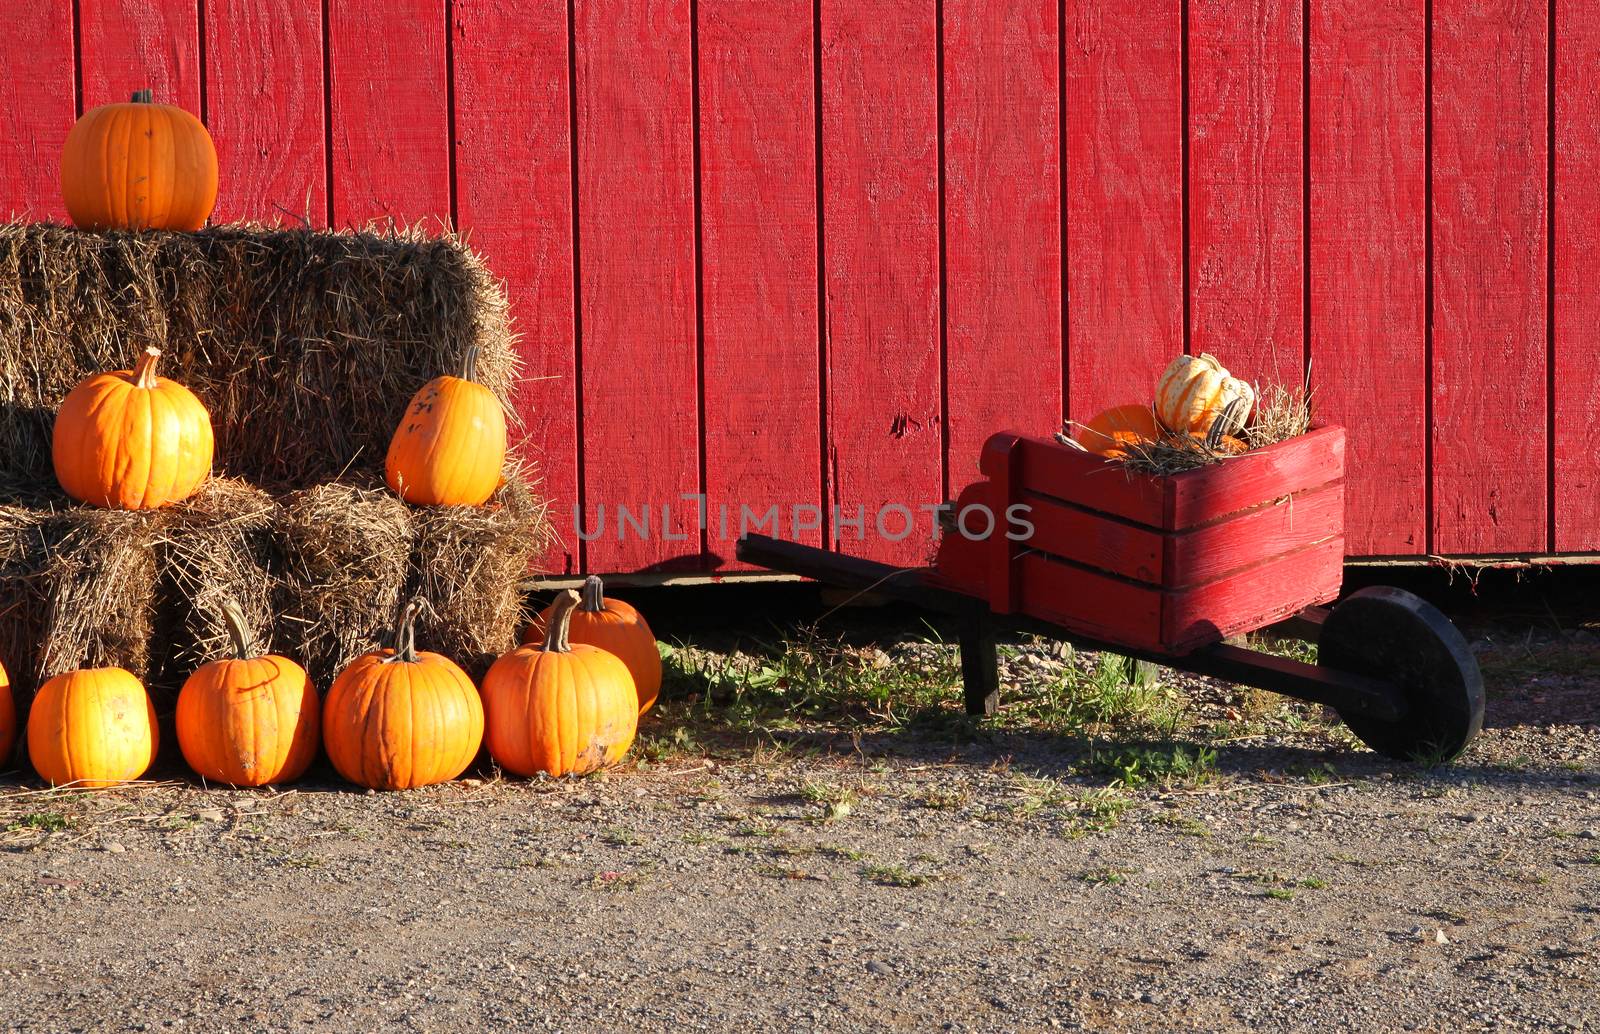 Colorful orange pumpkins on hay bales with red wooden background and wheelbarrow, an autumn scene